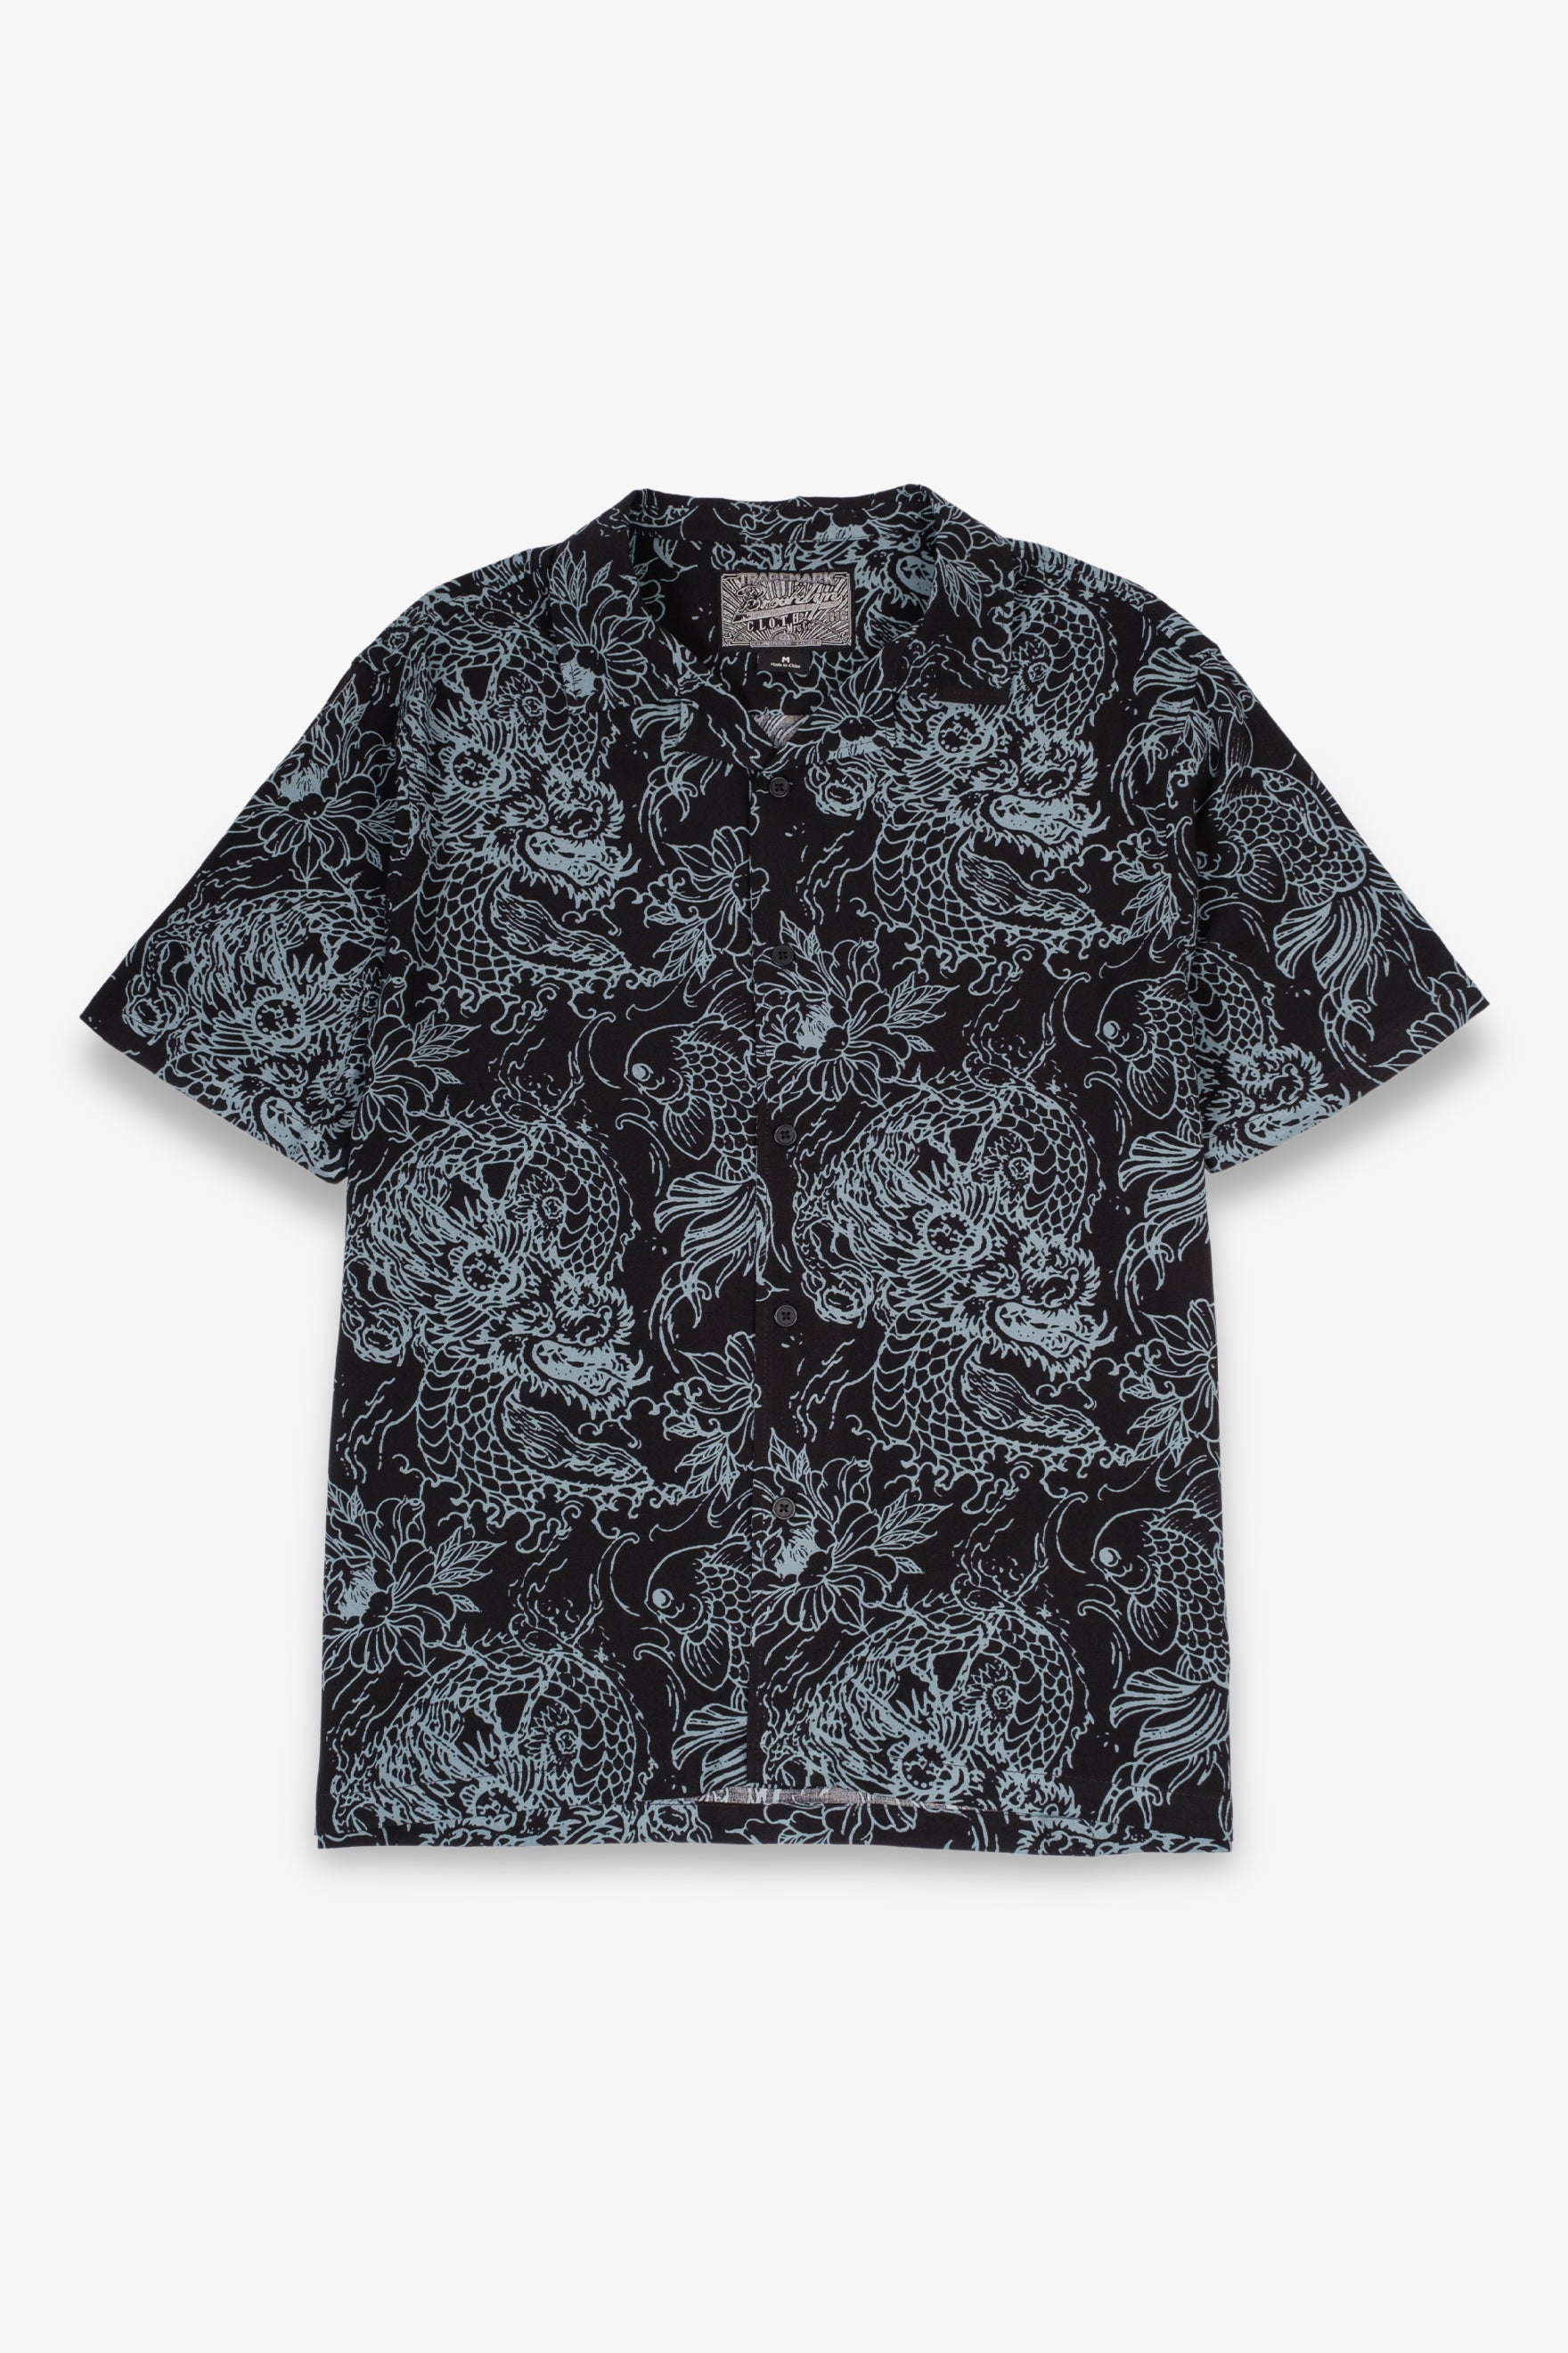 Brushed Florals Rayon Shirt, Men's Tops